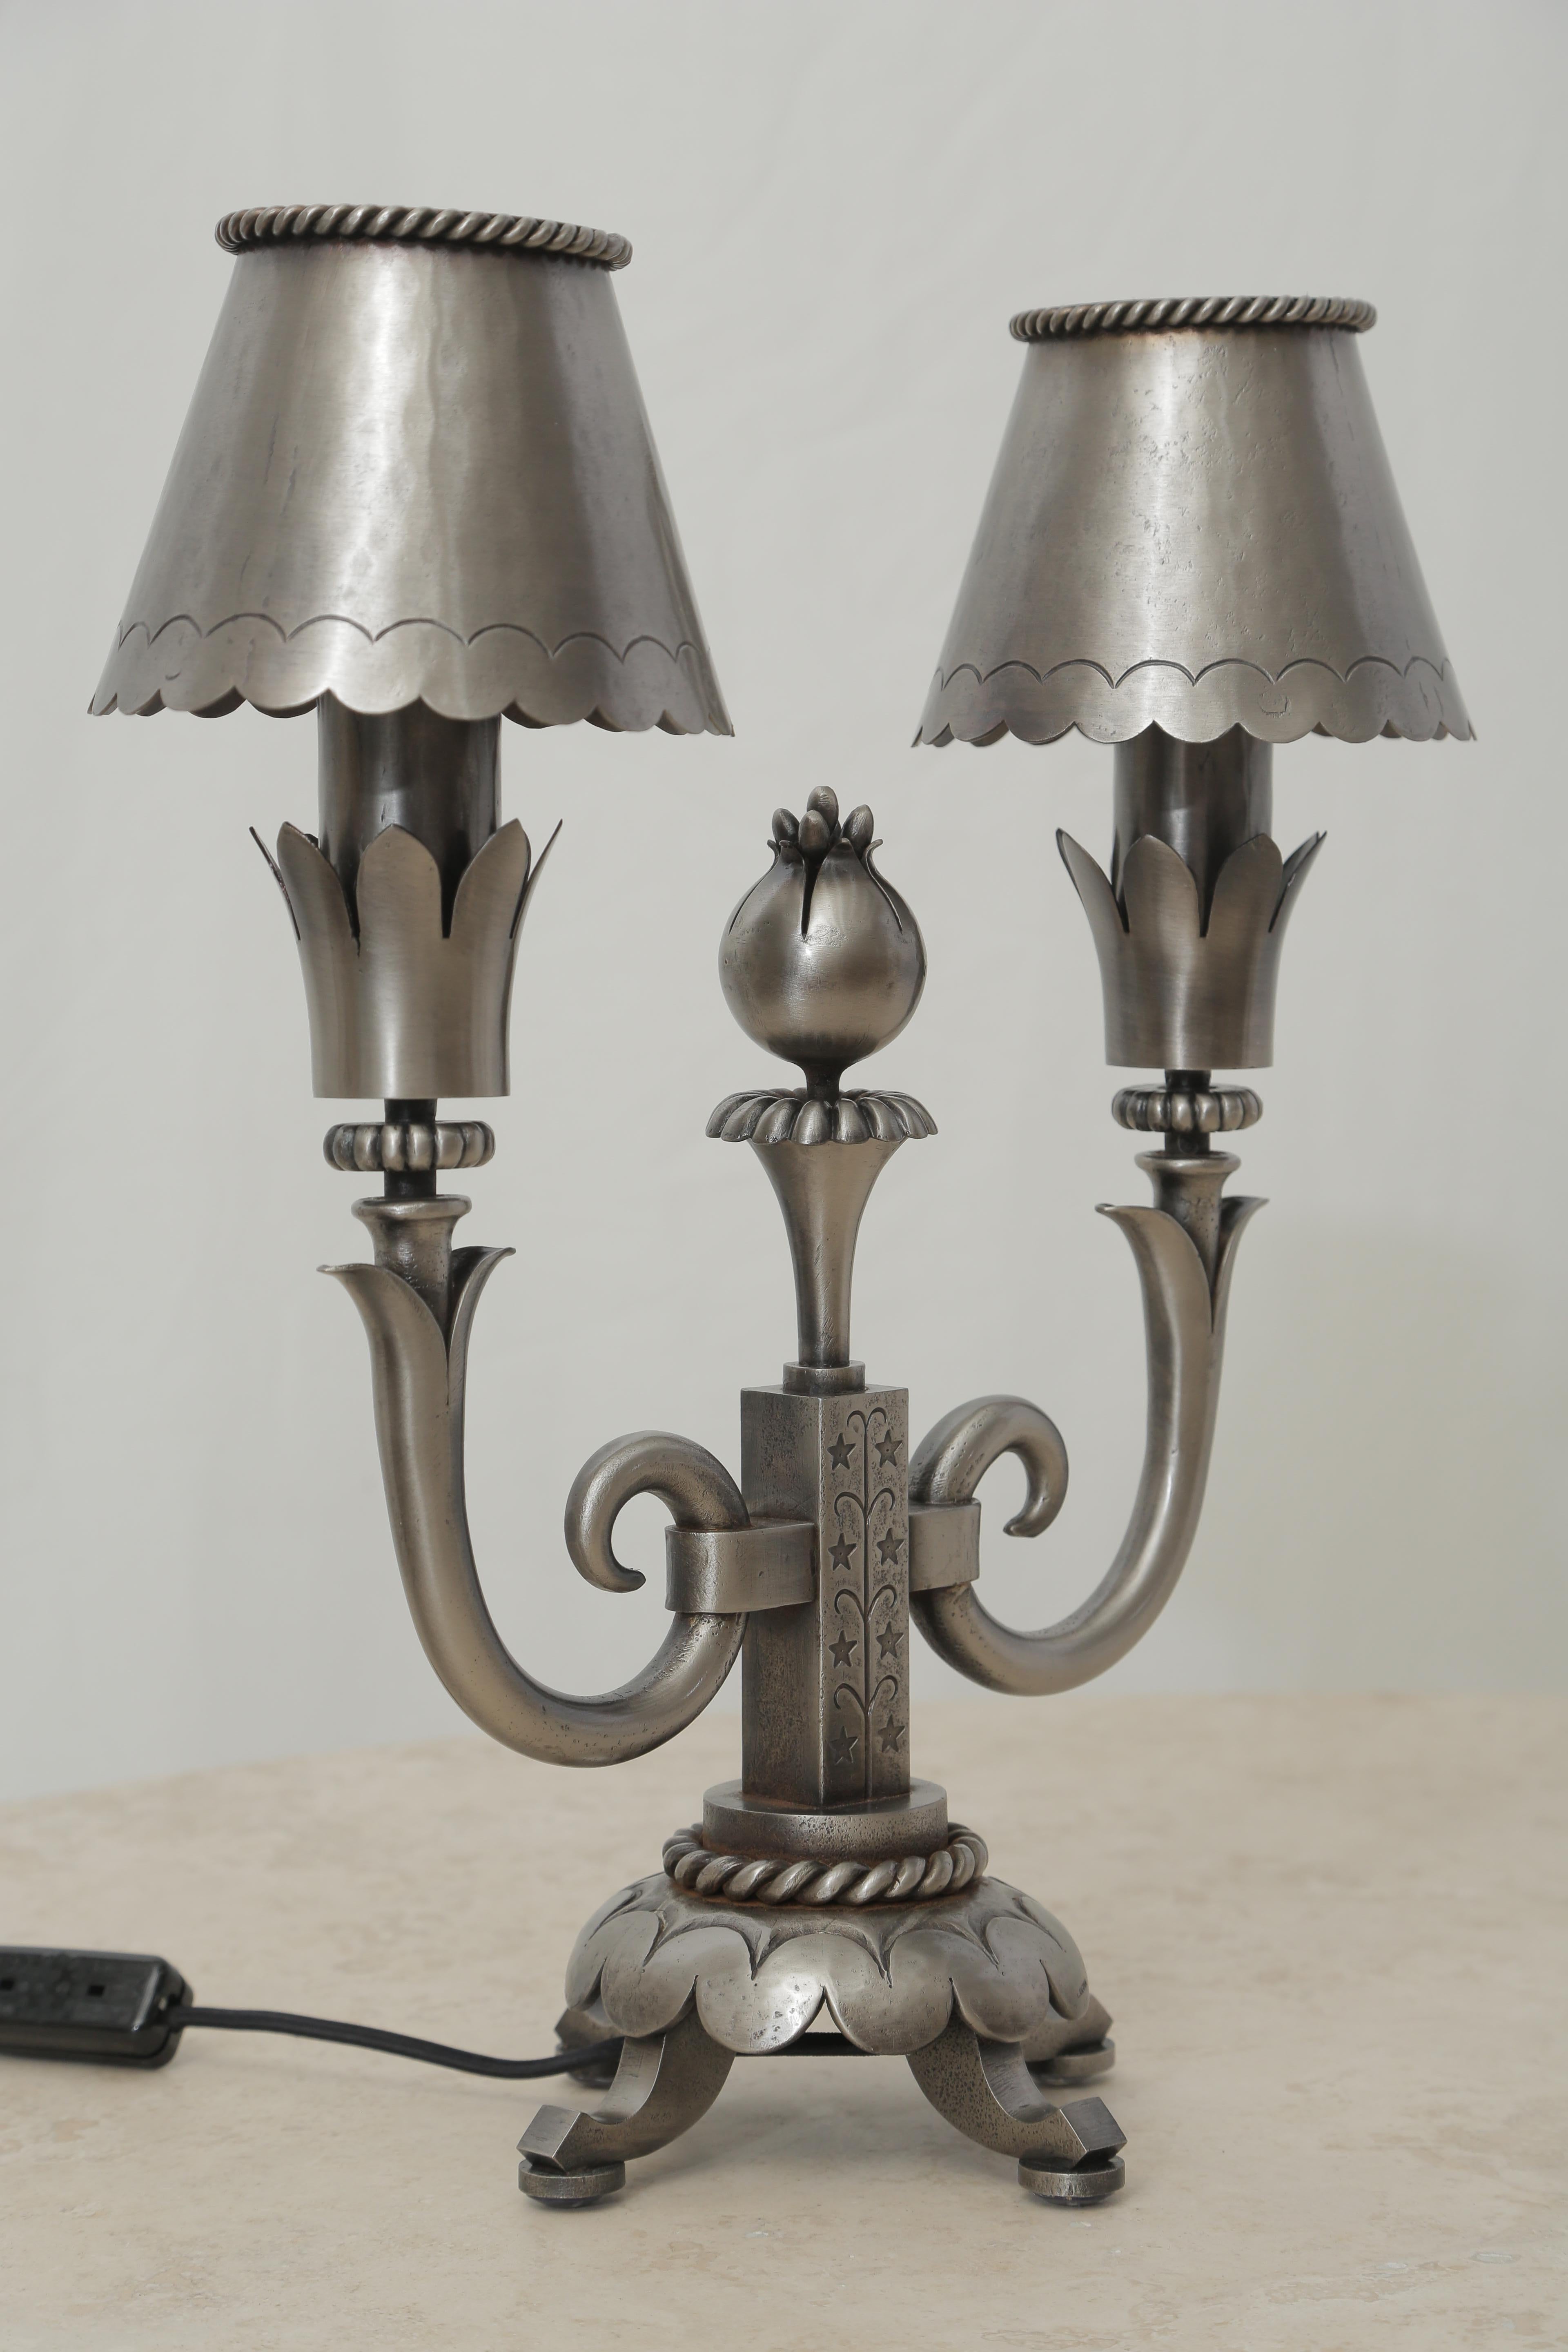 Pair of Midcentury Polished Wrought Iron Table Lamps Attributed to Poillerat 1